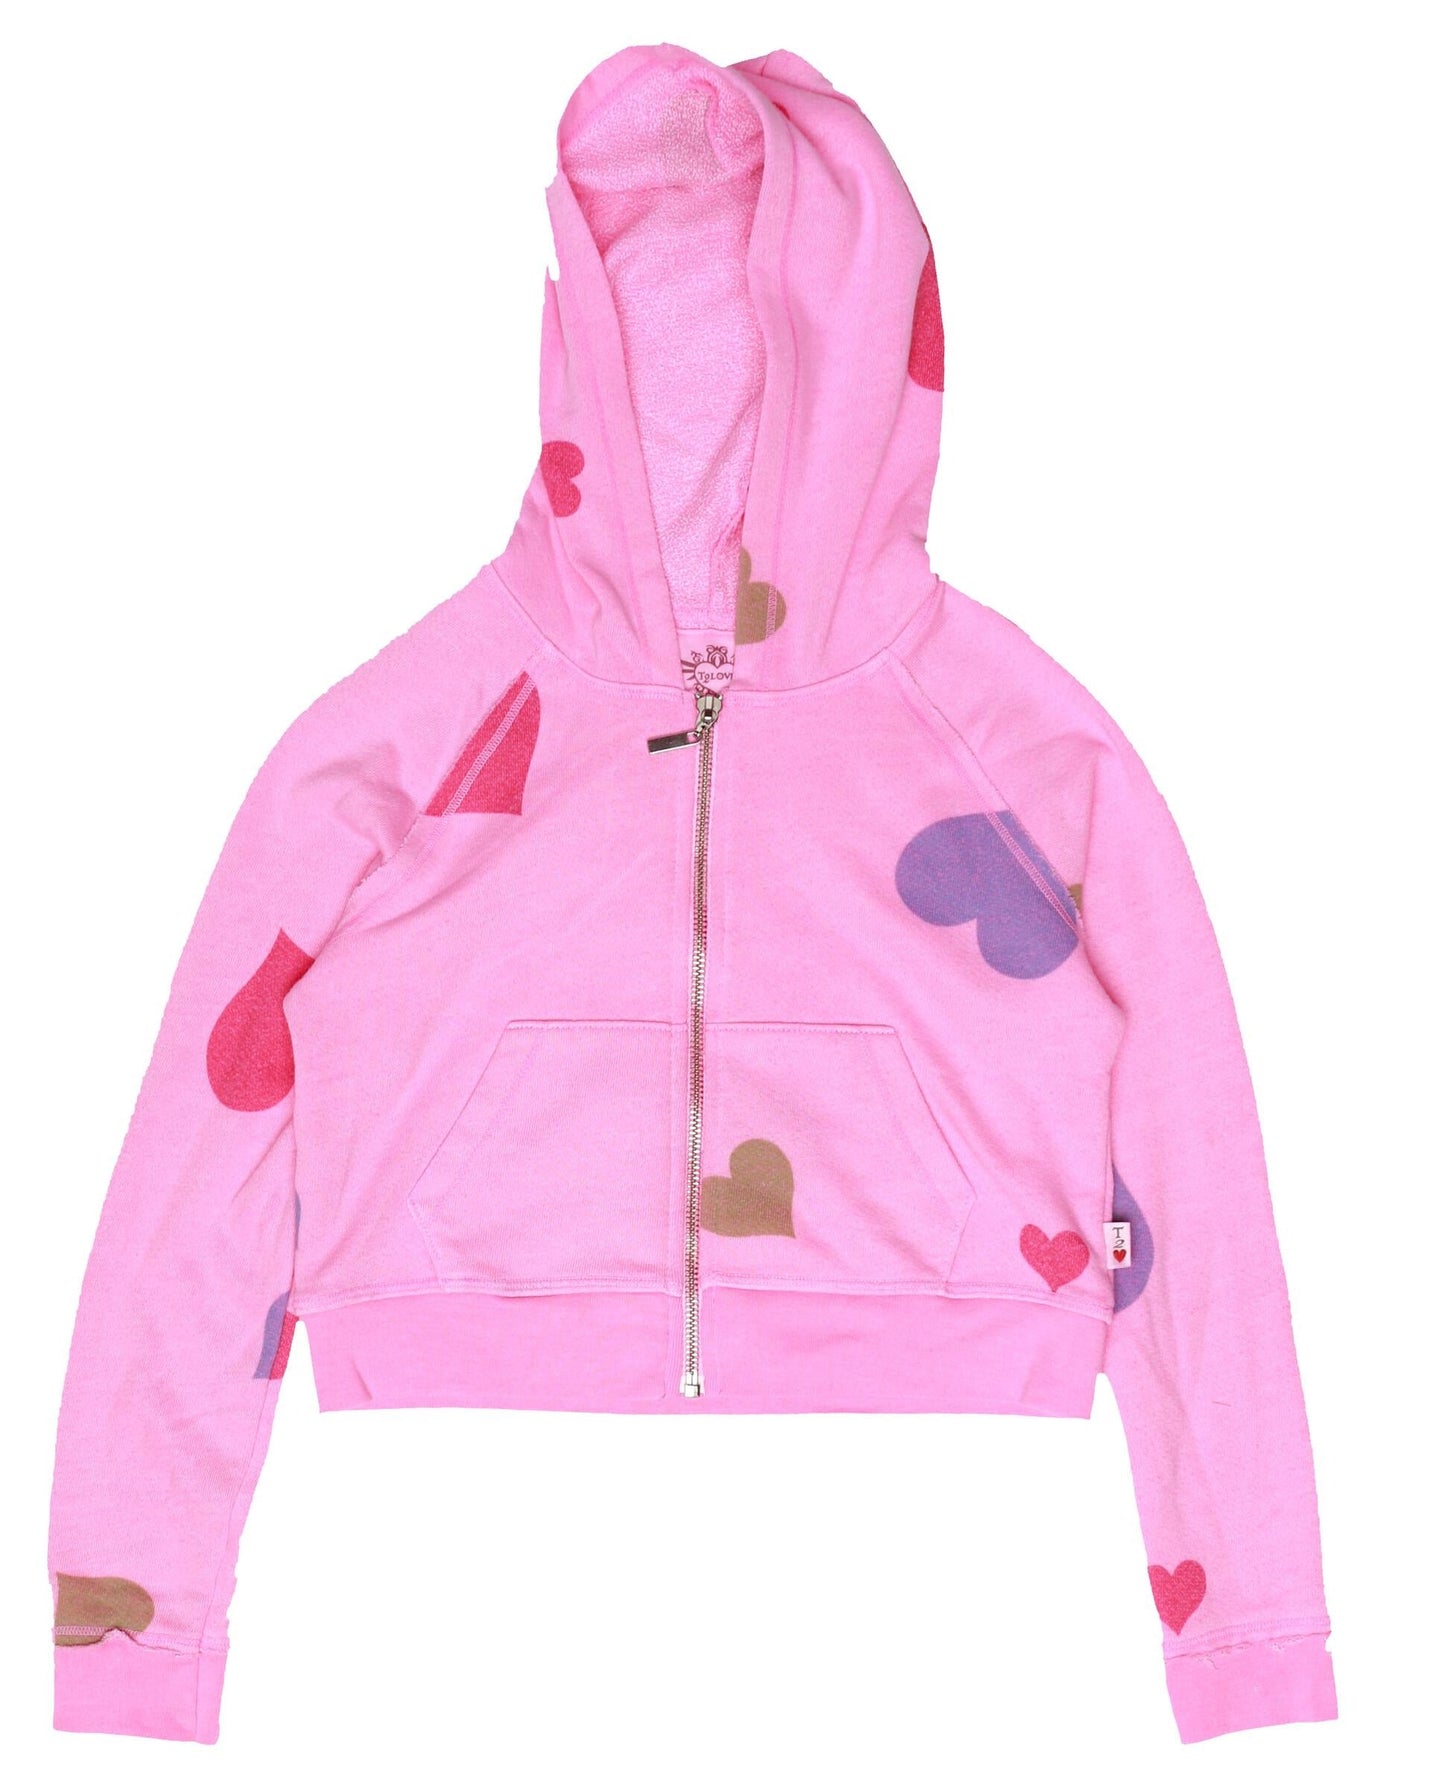 Colored-Hearts Cropped Hooded Jacket